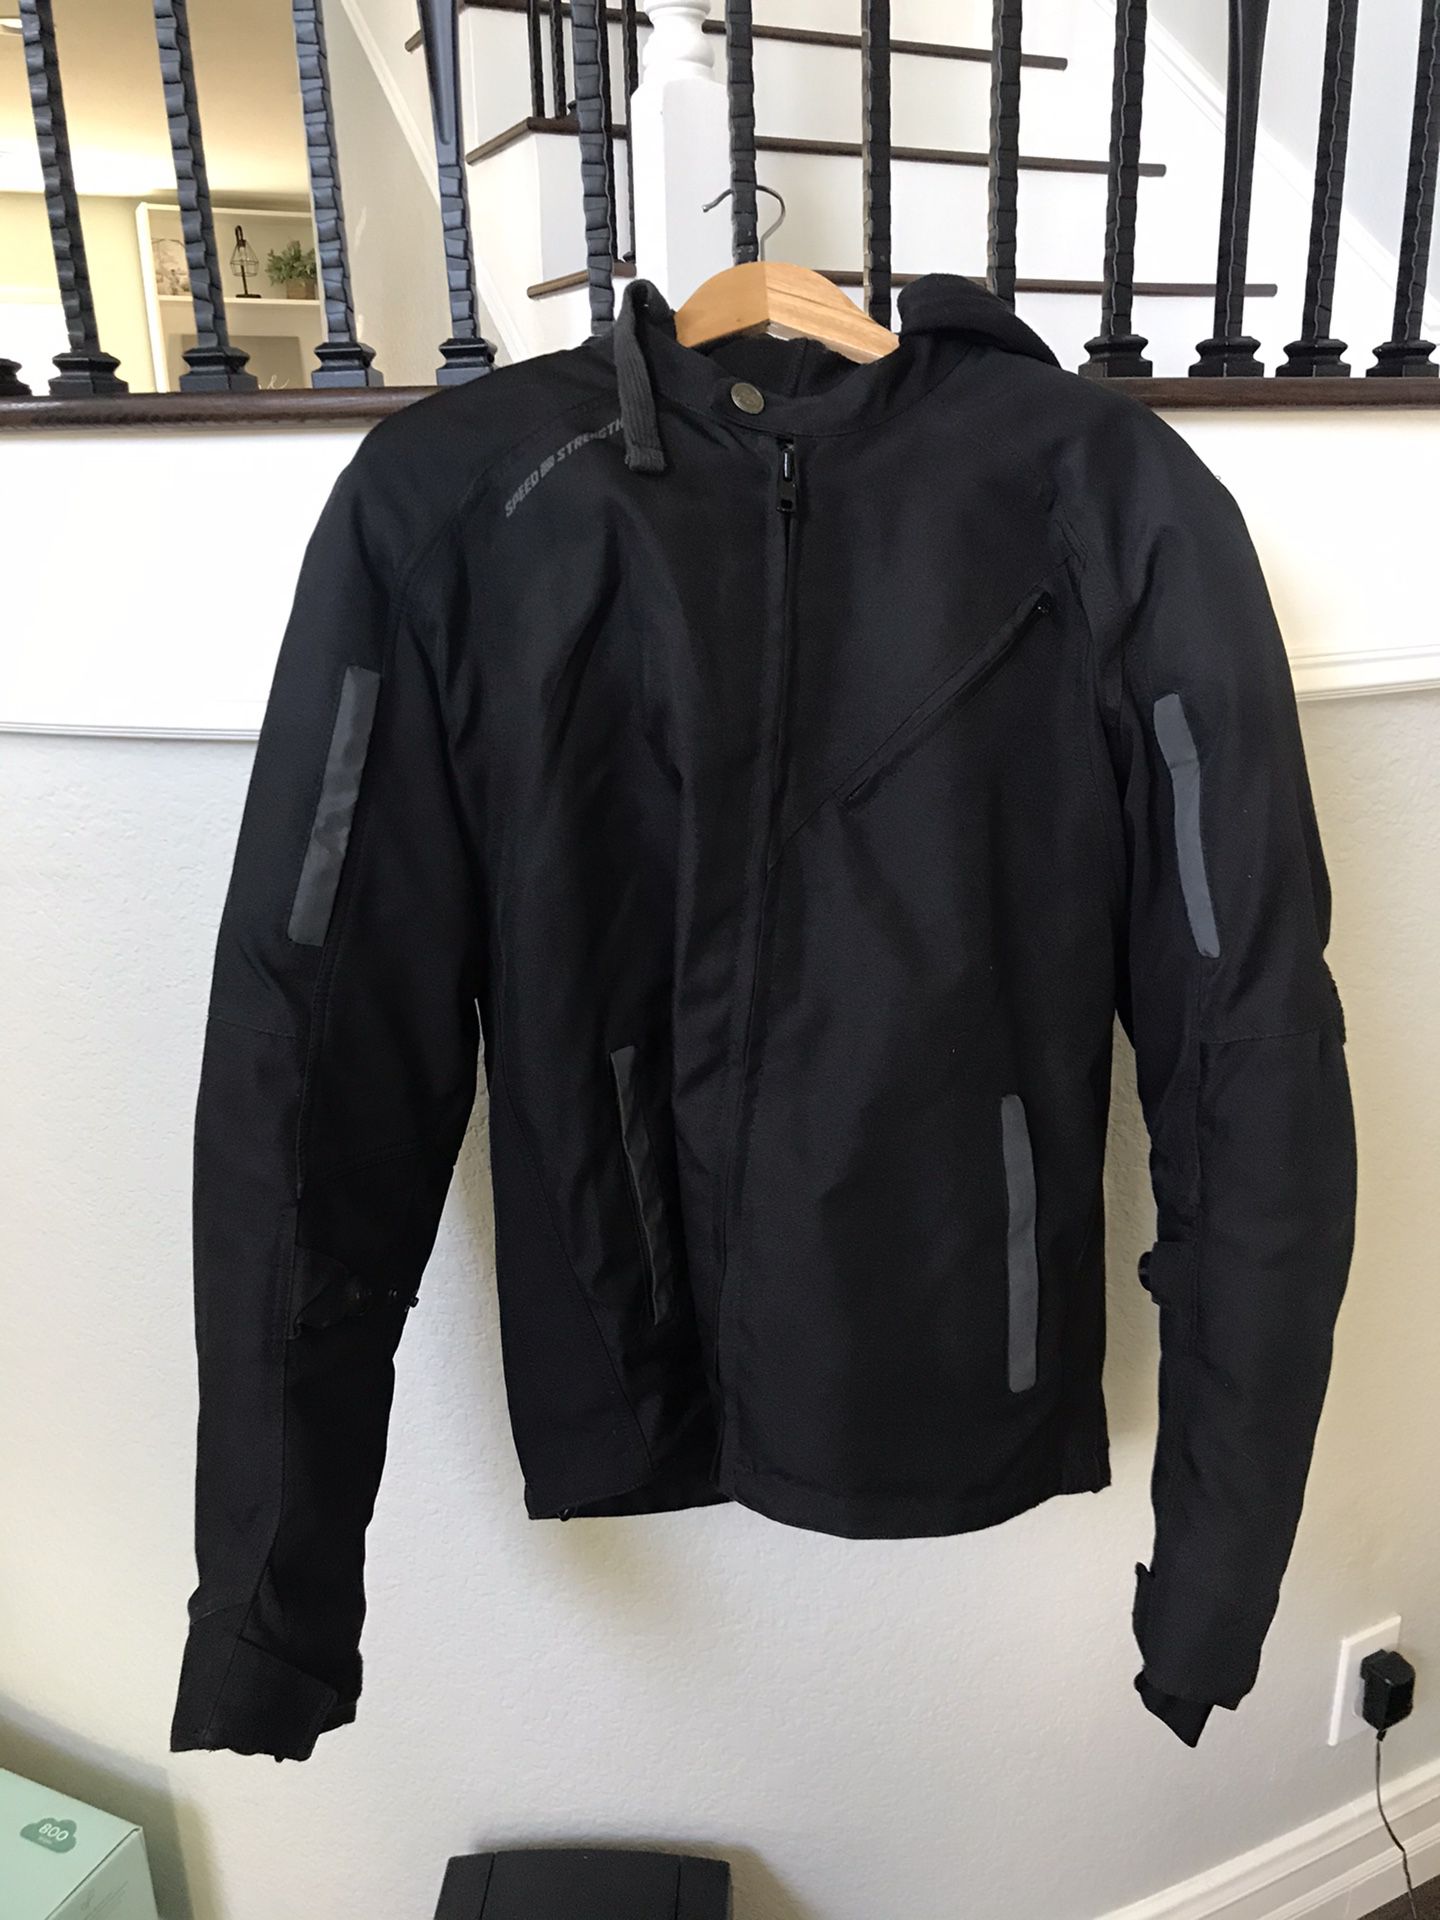 Motorcycle Jacket. Speed and strength Brand. Medium. fits like a Large